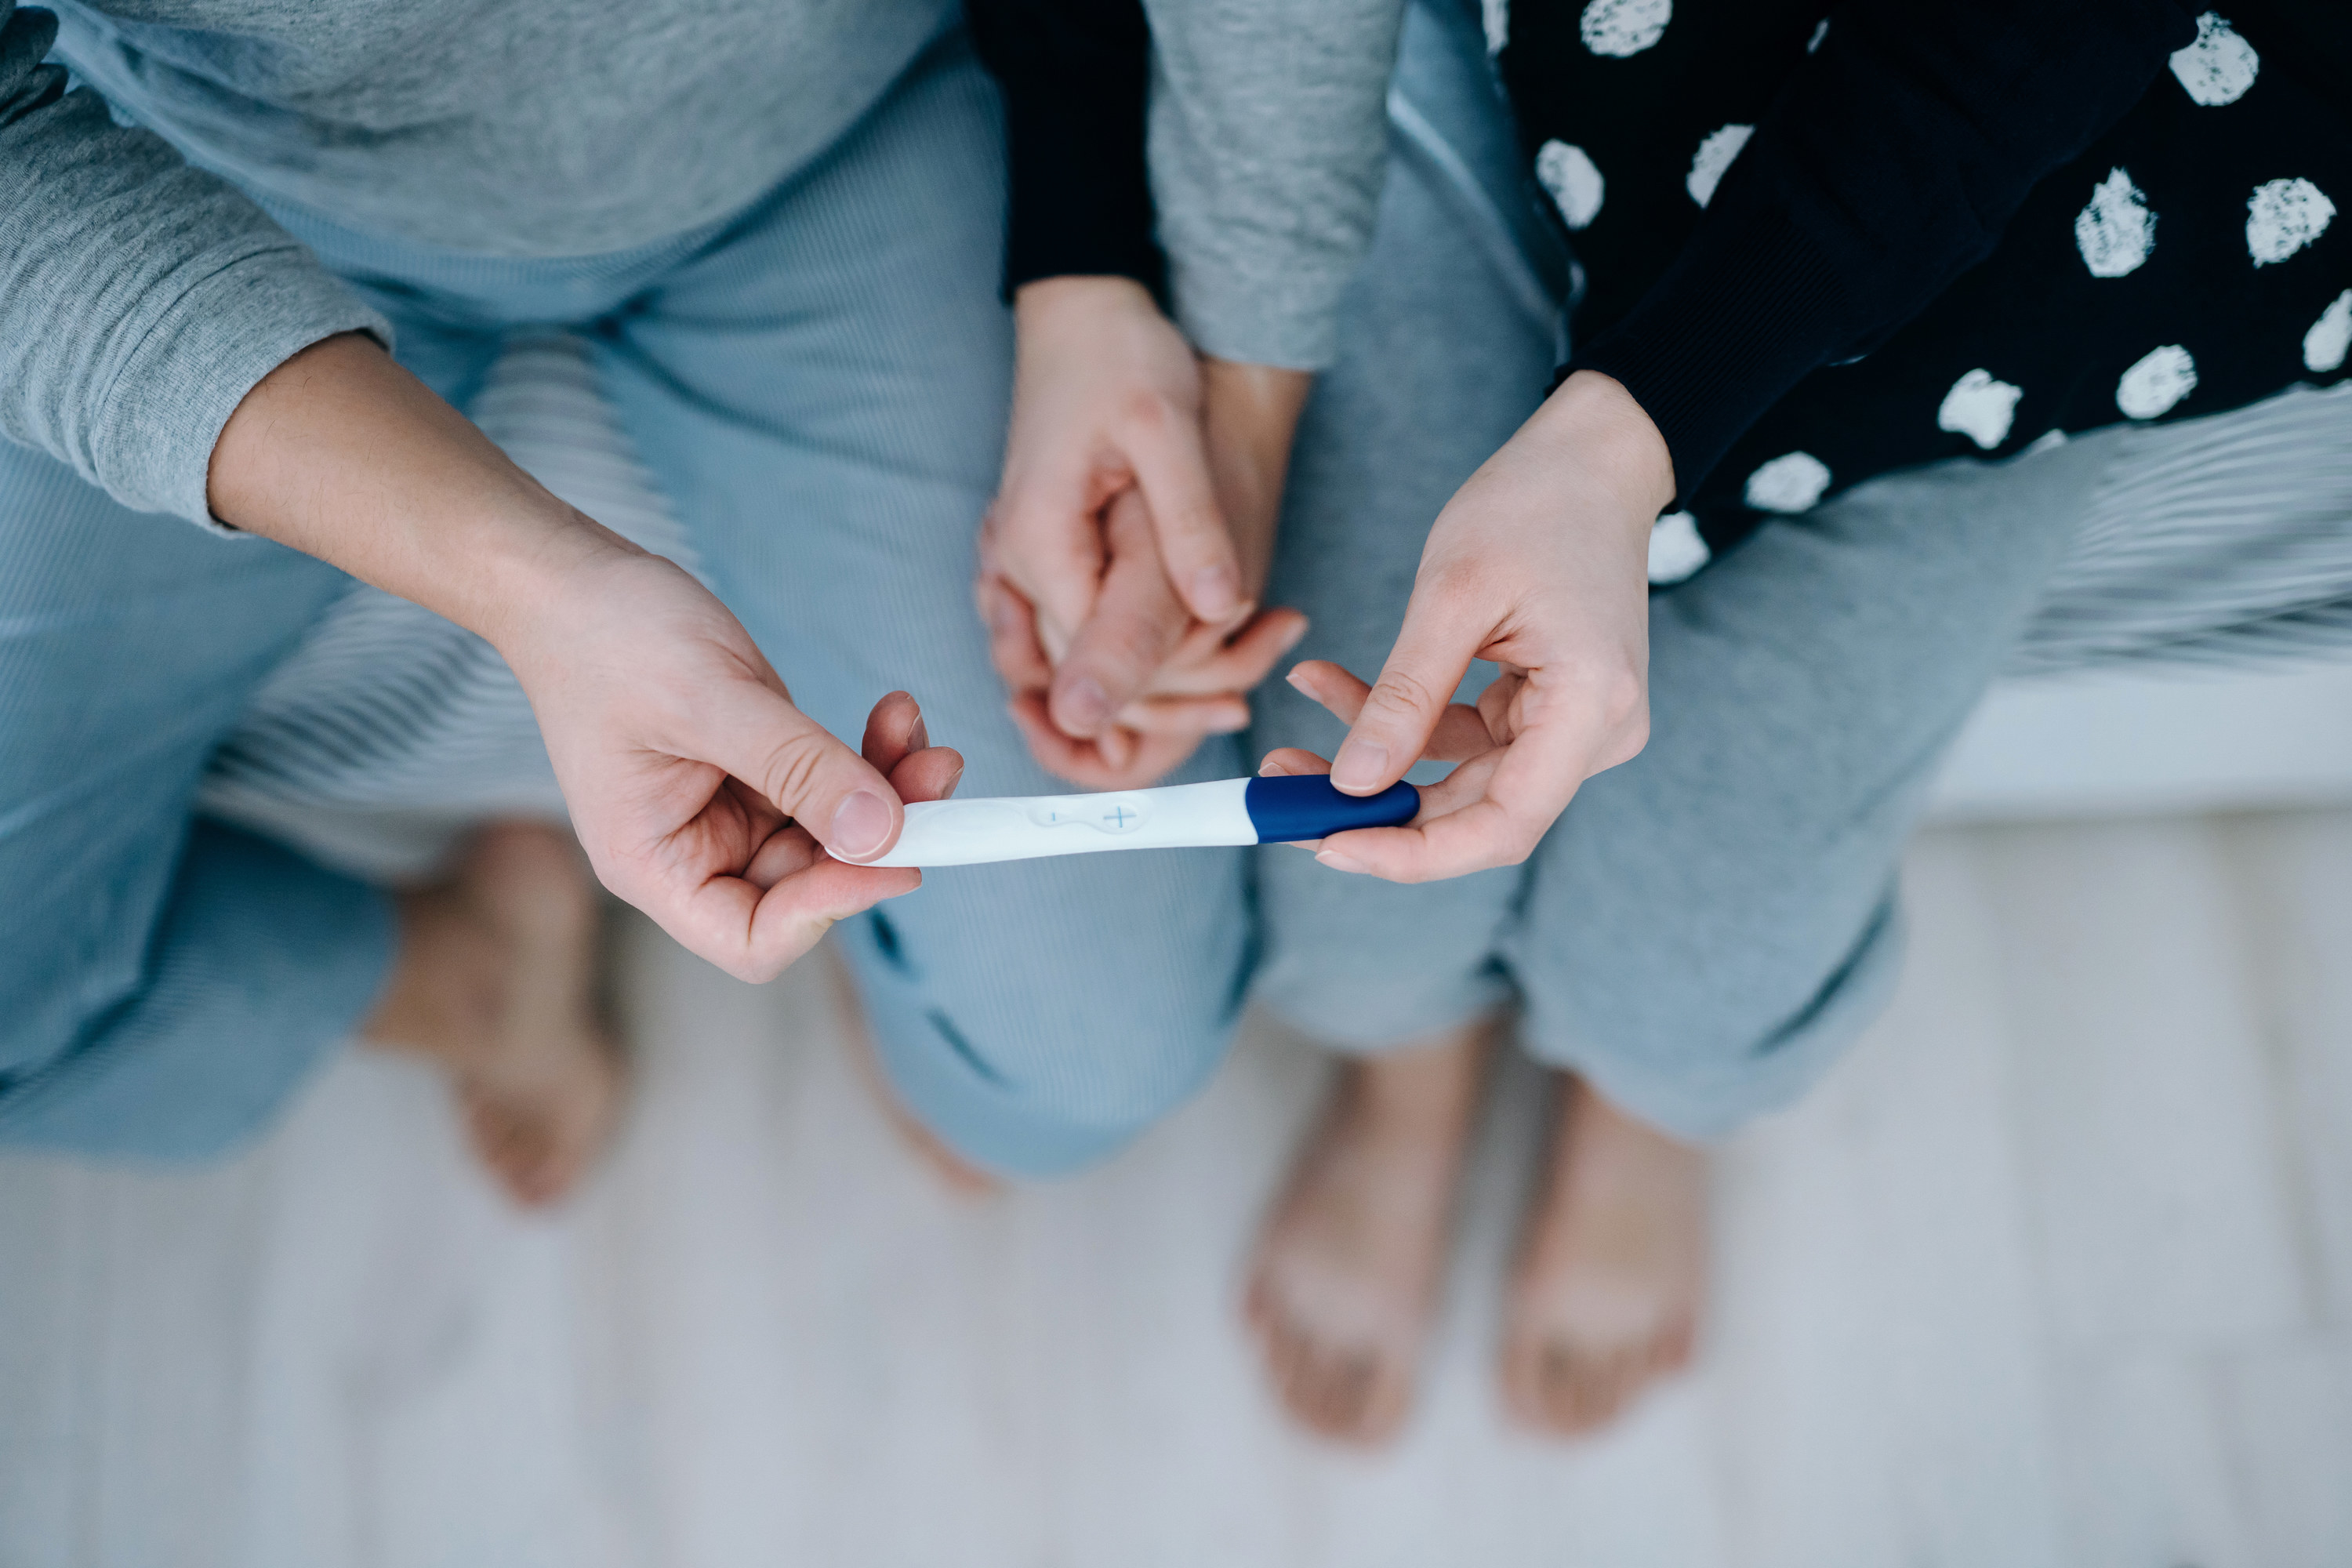 Couple sitting on the bed, holding hands and holding a pregnancy test together